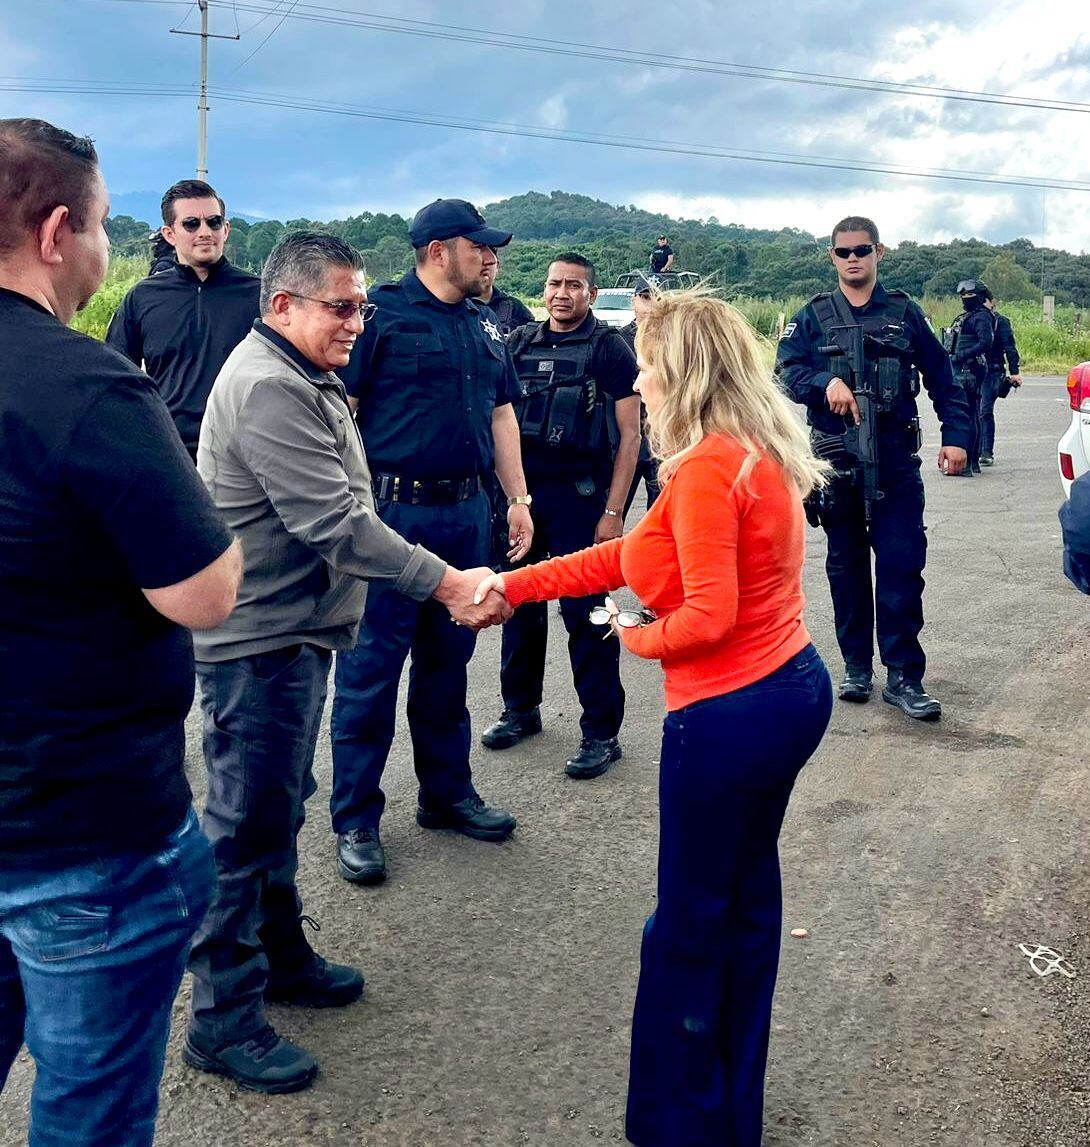 The state Secretary of Public Security, José Alfredo Ortega Reyes, appointed Civil Guard personnel this October 7 to guarantee the safety of the mayor and increase security in the municipality of Cotija.  Photo: SSP Michoacán